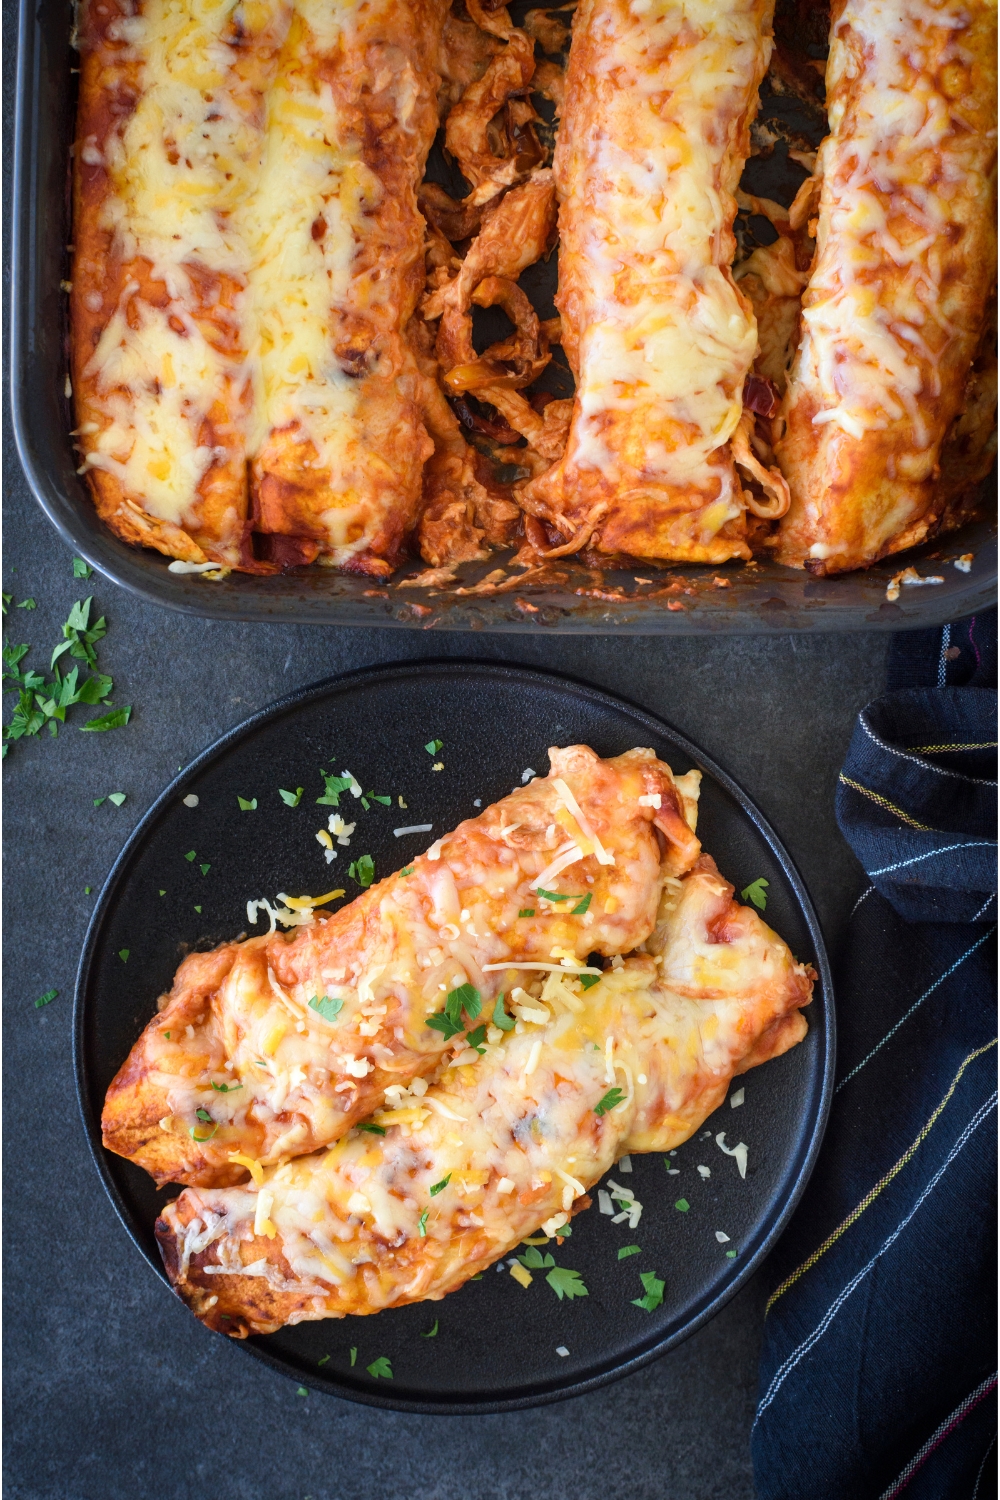 Two enchiladas on a black plate garnished with fresh herbs next to a baking dish containing the rest of the enchiladas.